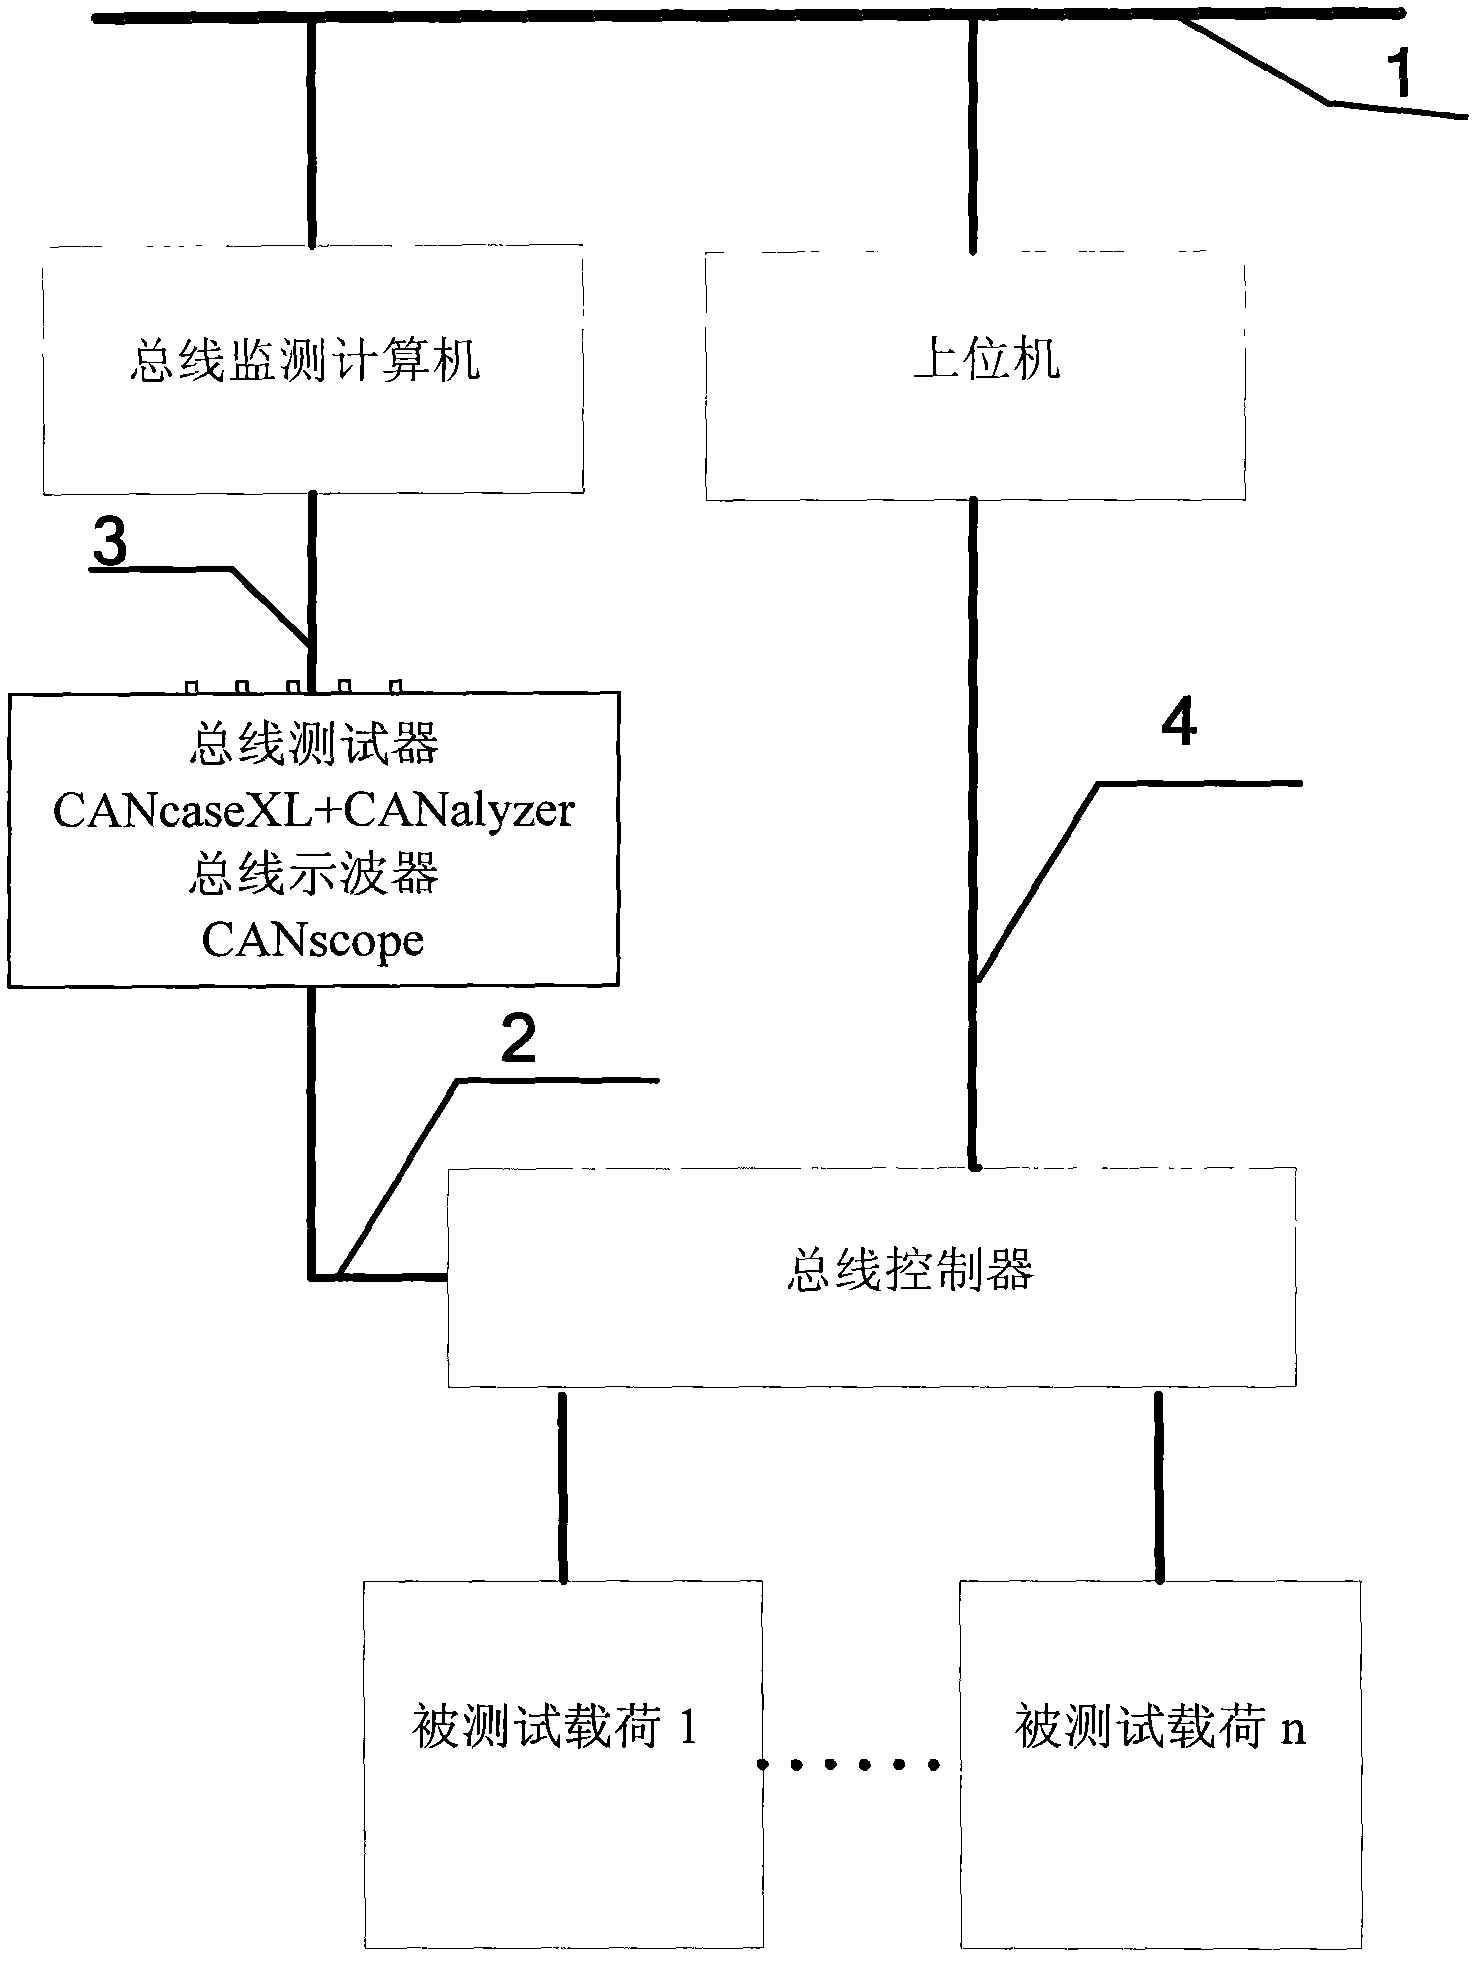 Remote control controlled area network (CAN) bus testing device and method